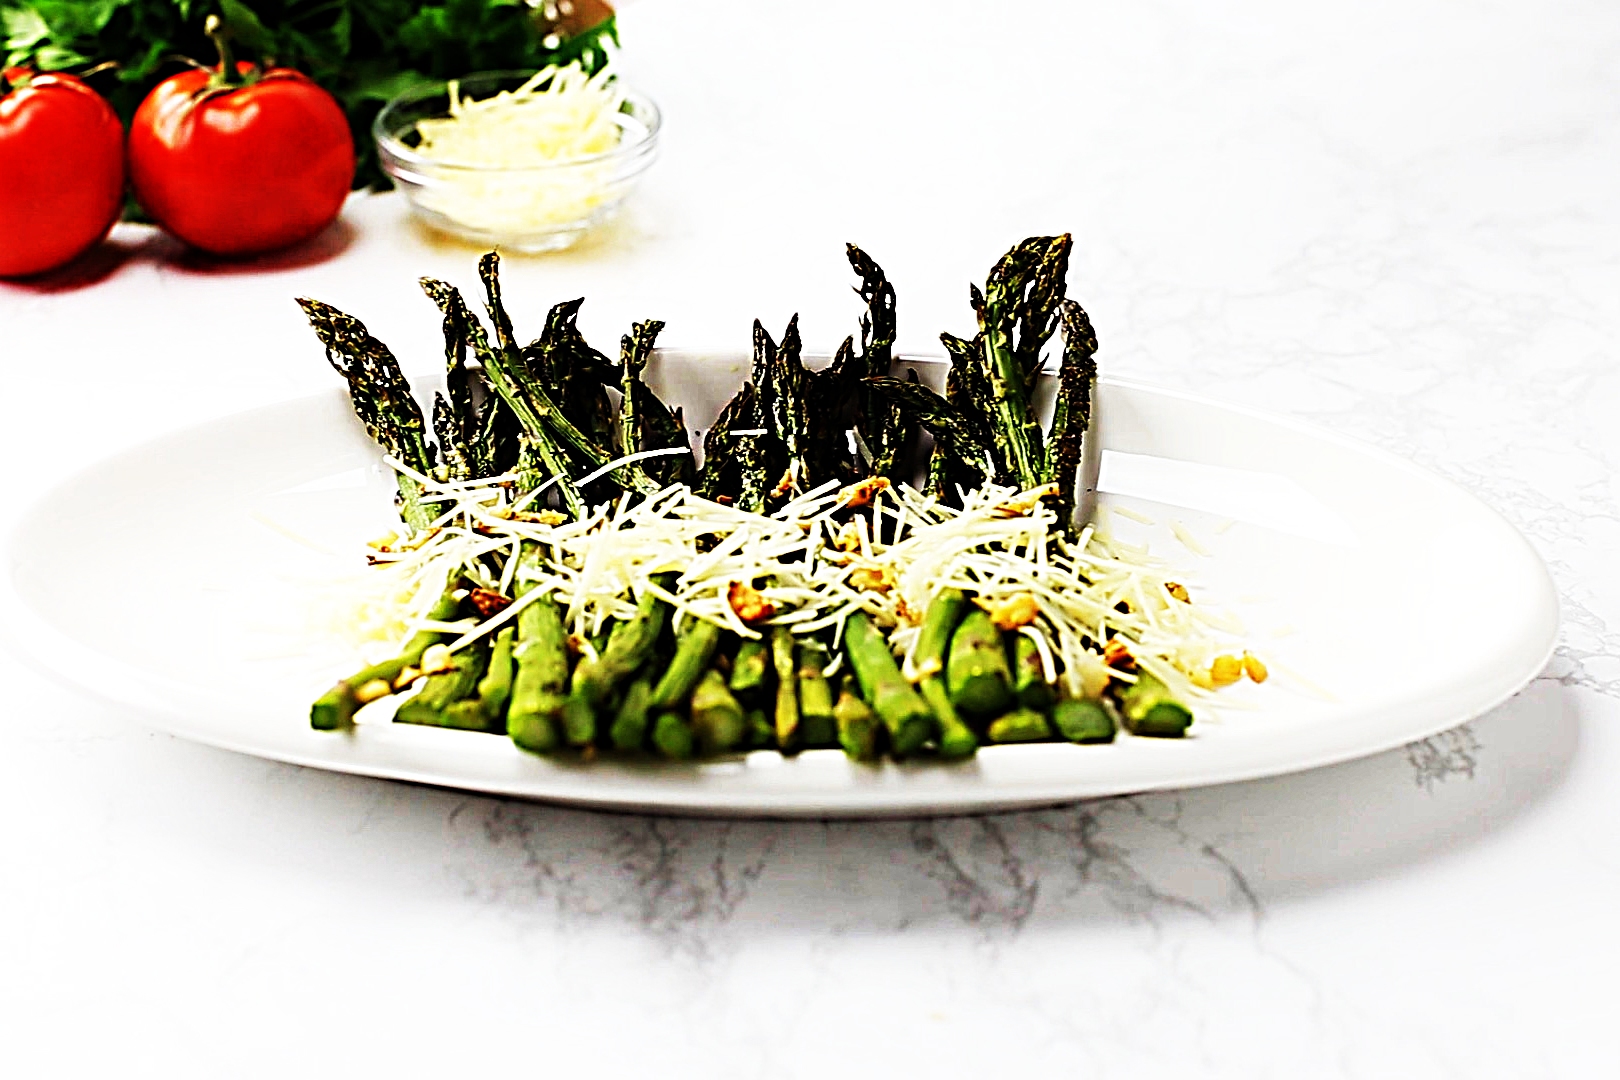 Stupid-Easy Recipe for One-Pan Garlic-Parmesan Asparagus (#1 Top-Rated)